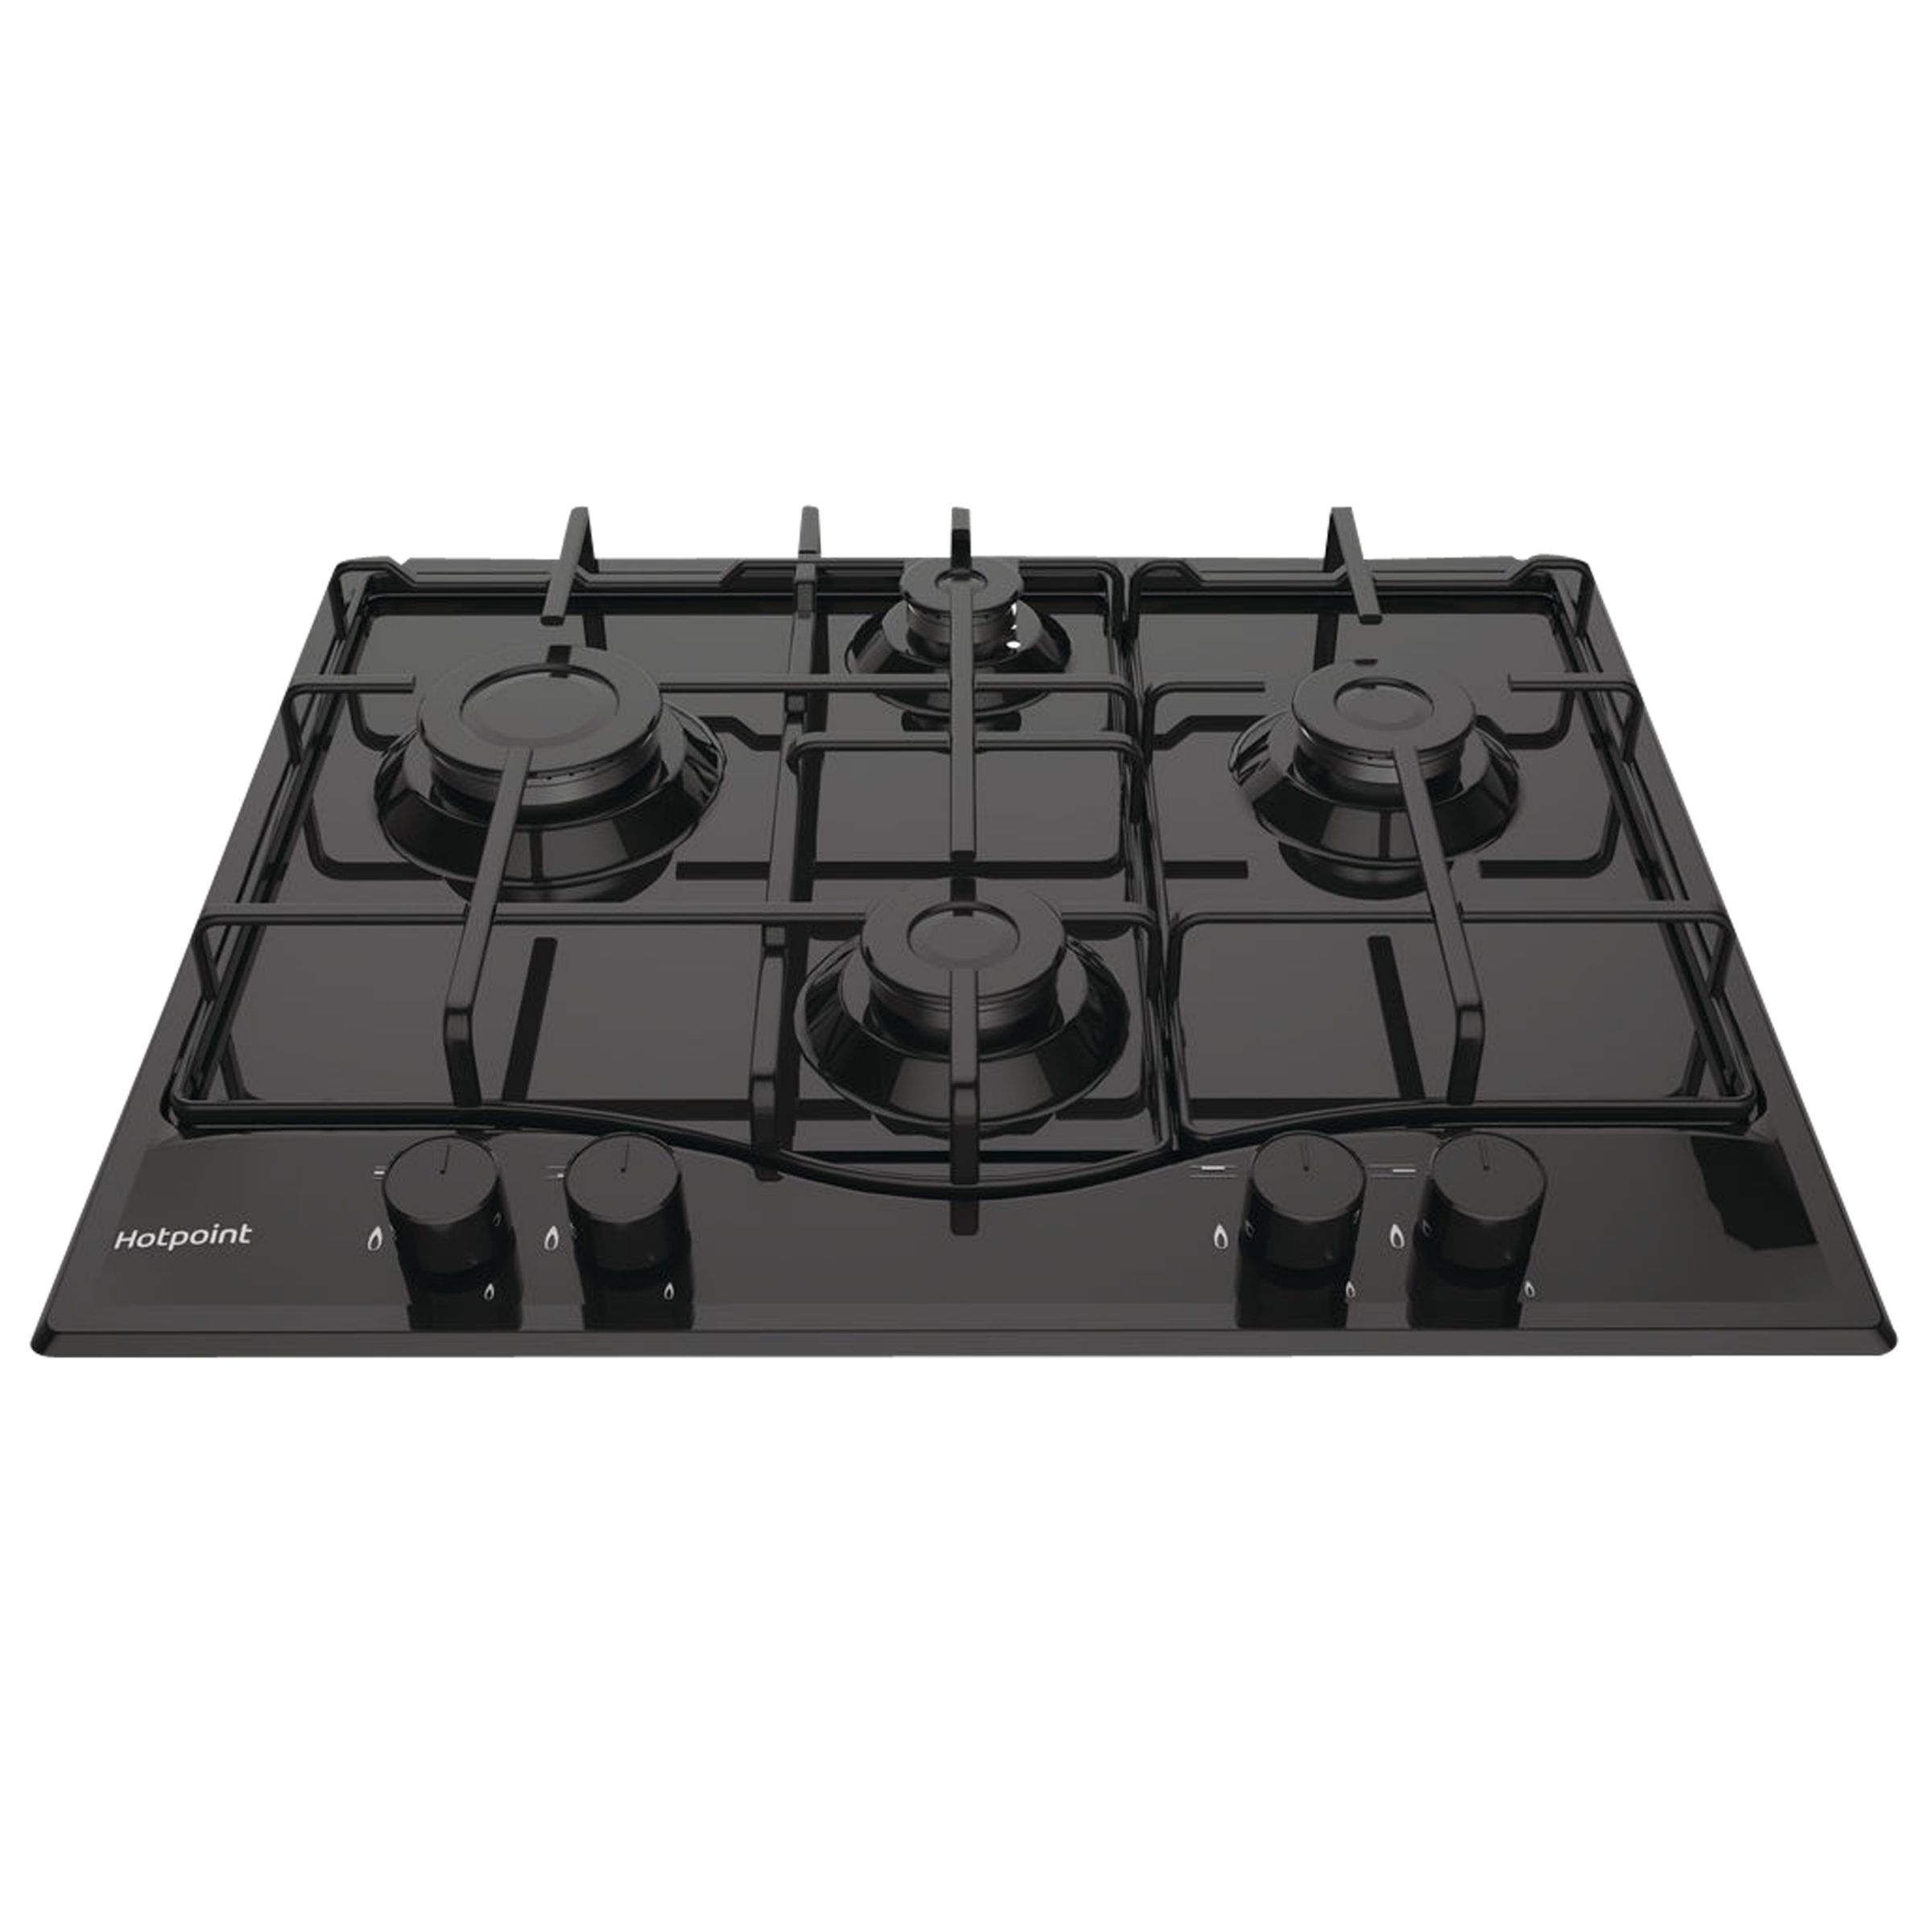 Hotpoint PCN642IXH Gas Hob, Stainless Steel